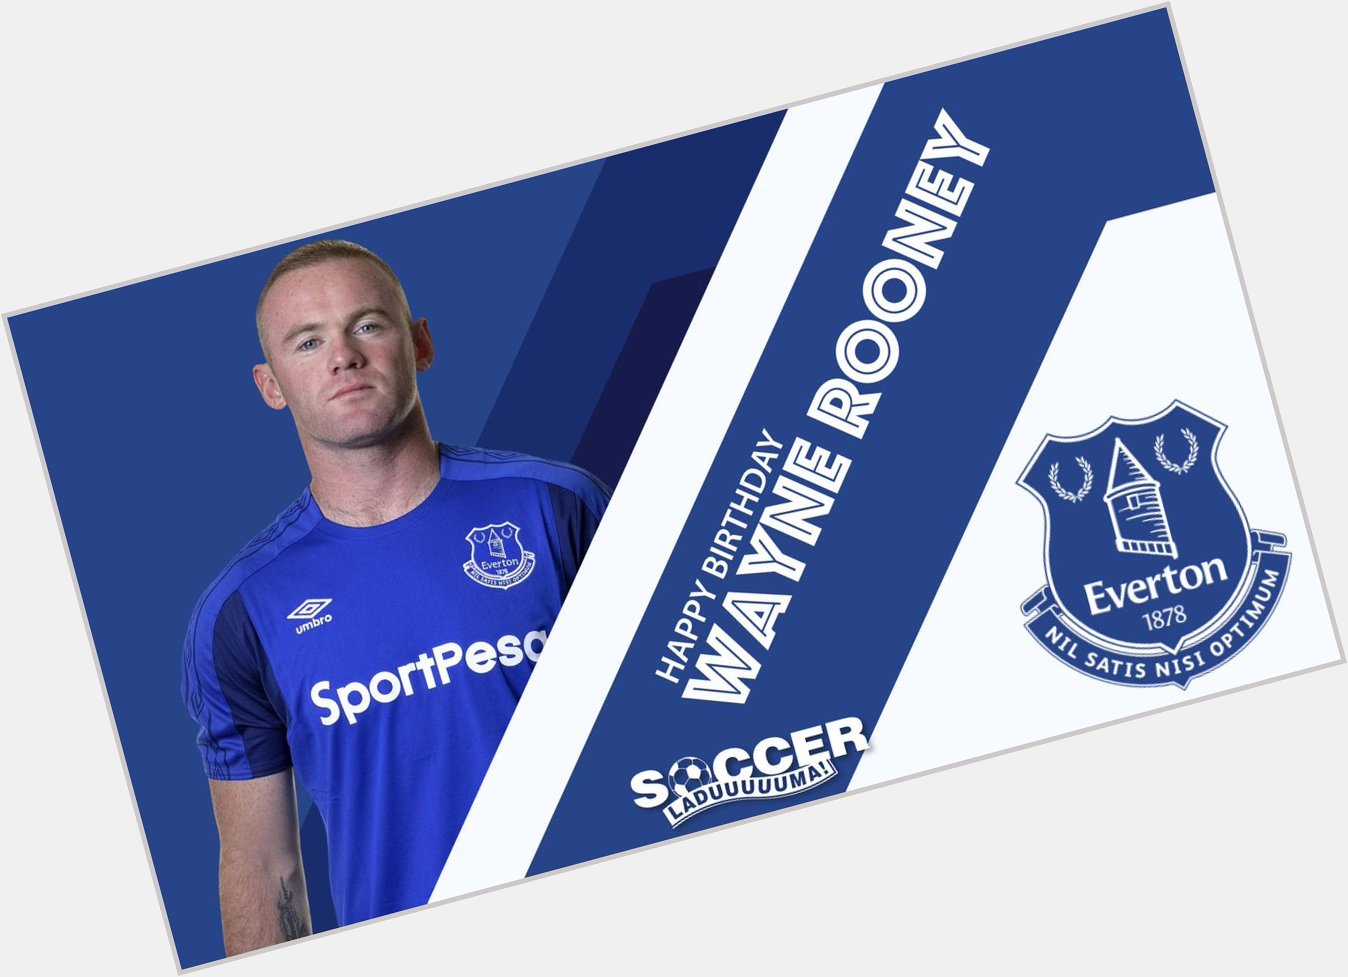 Join us as we wish Everton s Wayne Rooney a very Happy Birthday. He turns 32 today! 